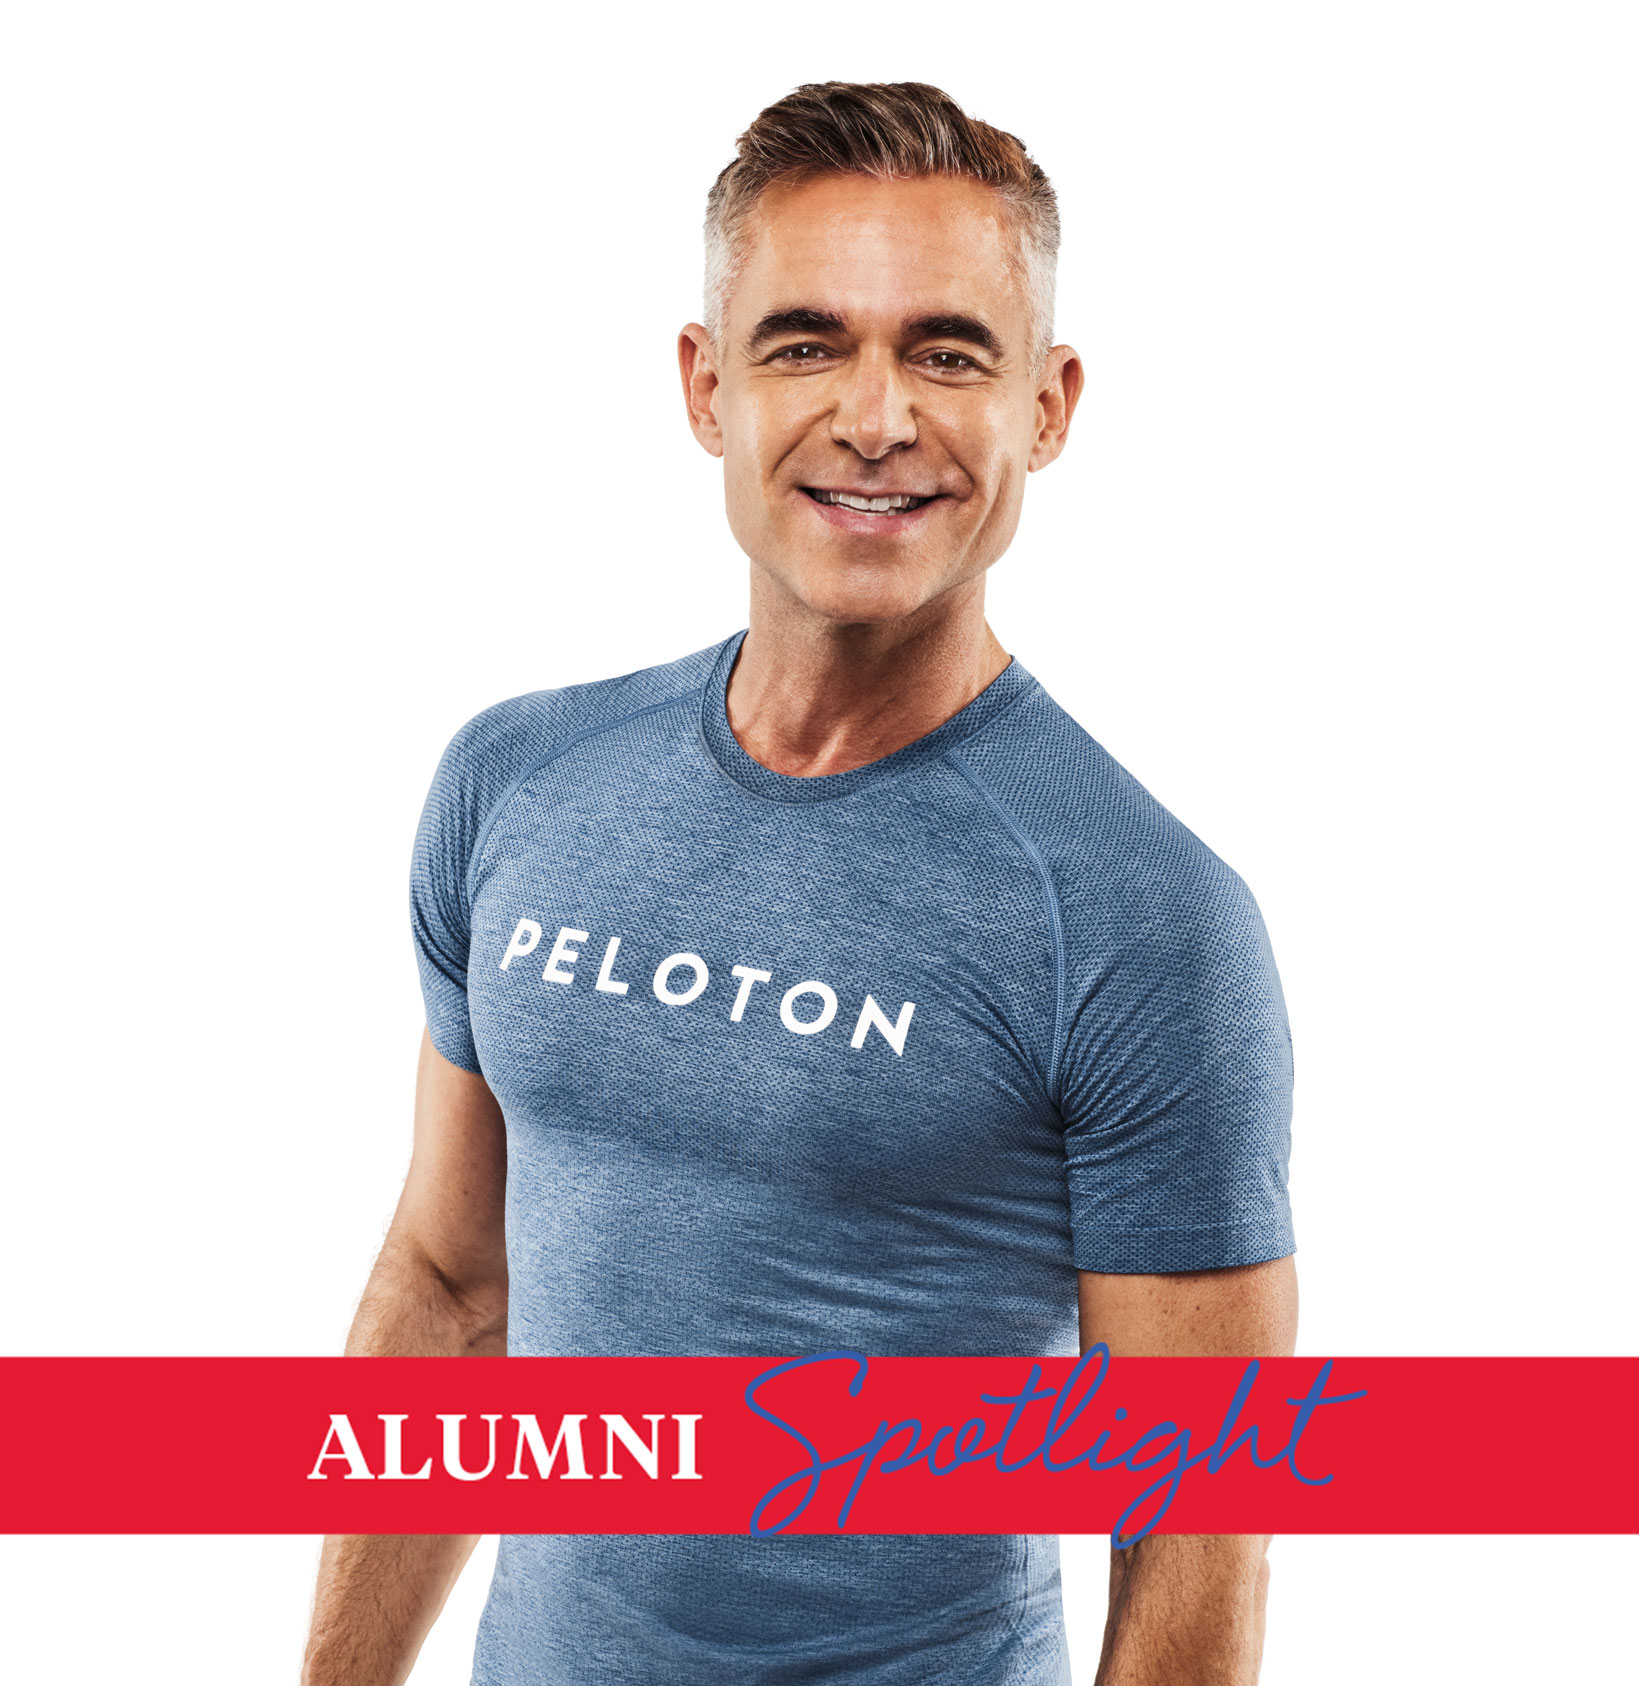 Alum Ross Rayburn (B.A. '93) is the Lead Instructor for Yoga and Meditation at Peloton.